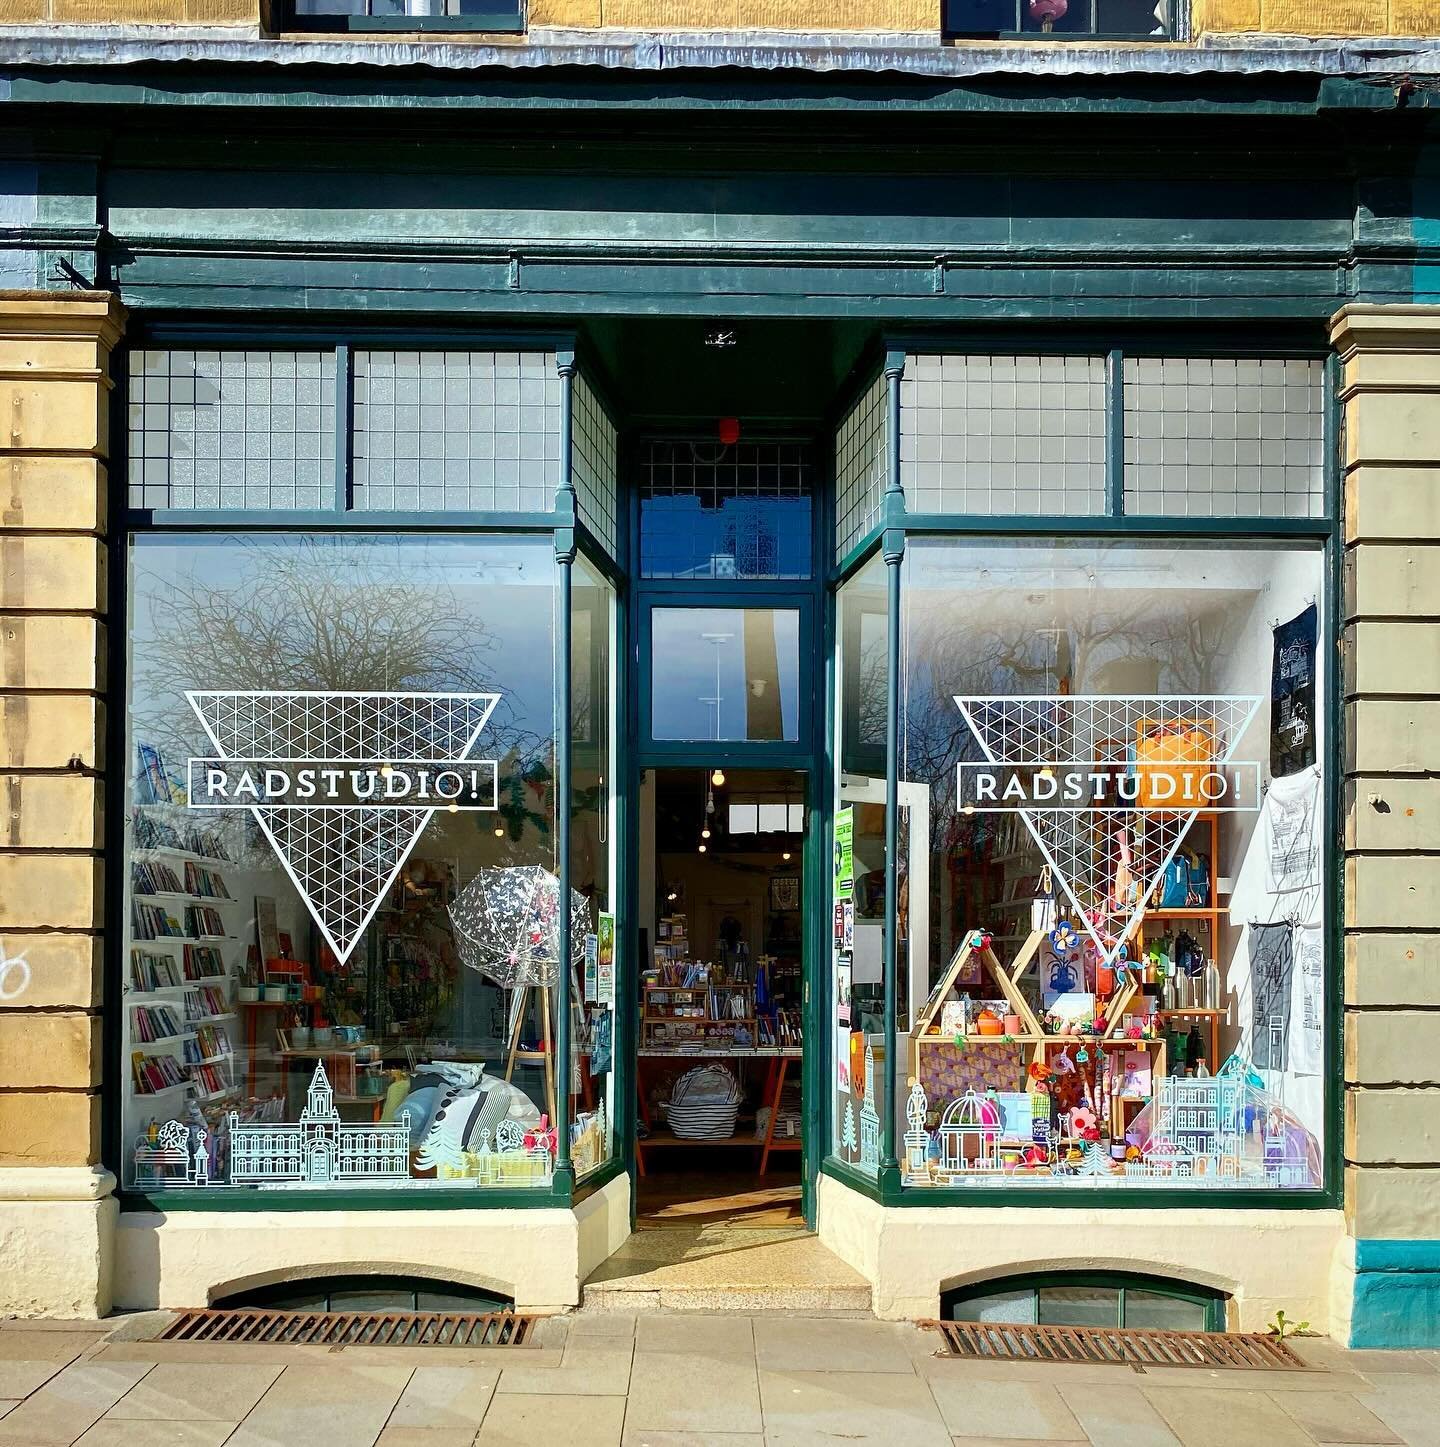 SHOPFRONT (bit of a cheat - it&rsquo;s an oldie as we have wet paint signs up right now), so here it is in it&rsquo;s glory 🤩 We are RAD Studio in the lovely UNESCO World Heritage Site of Saltaire, Bradford. Looking forward to sharing more about our